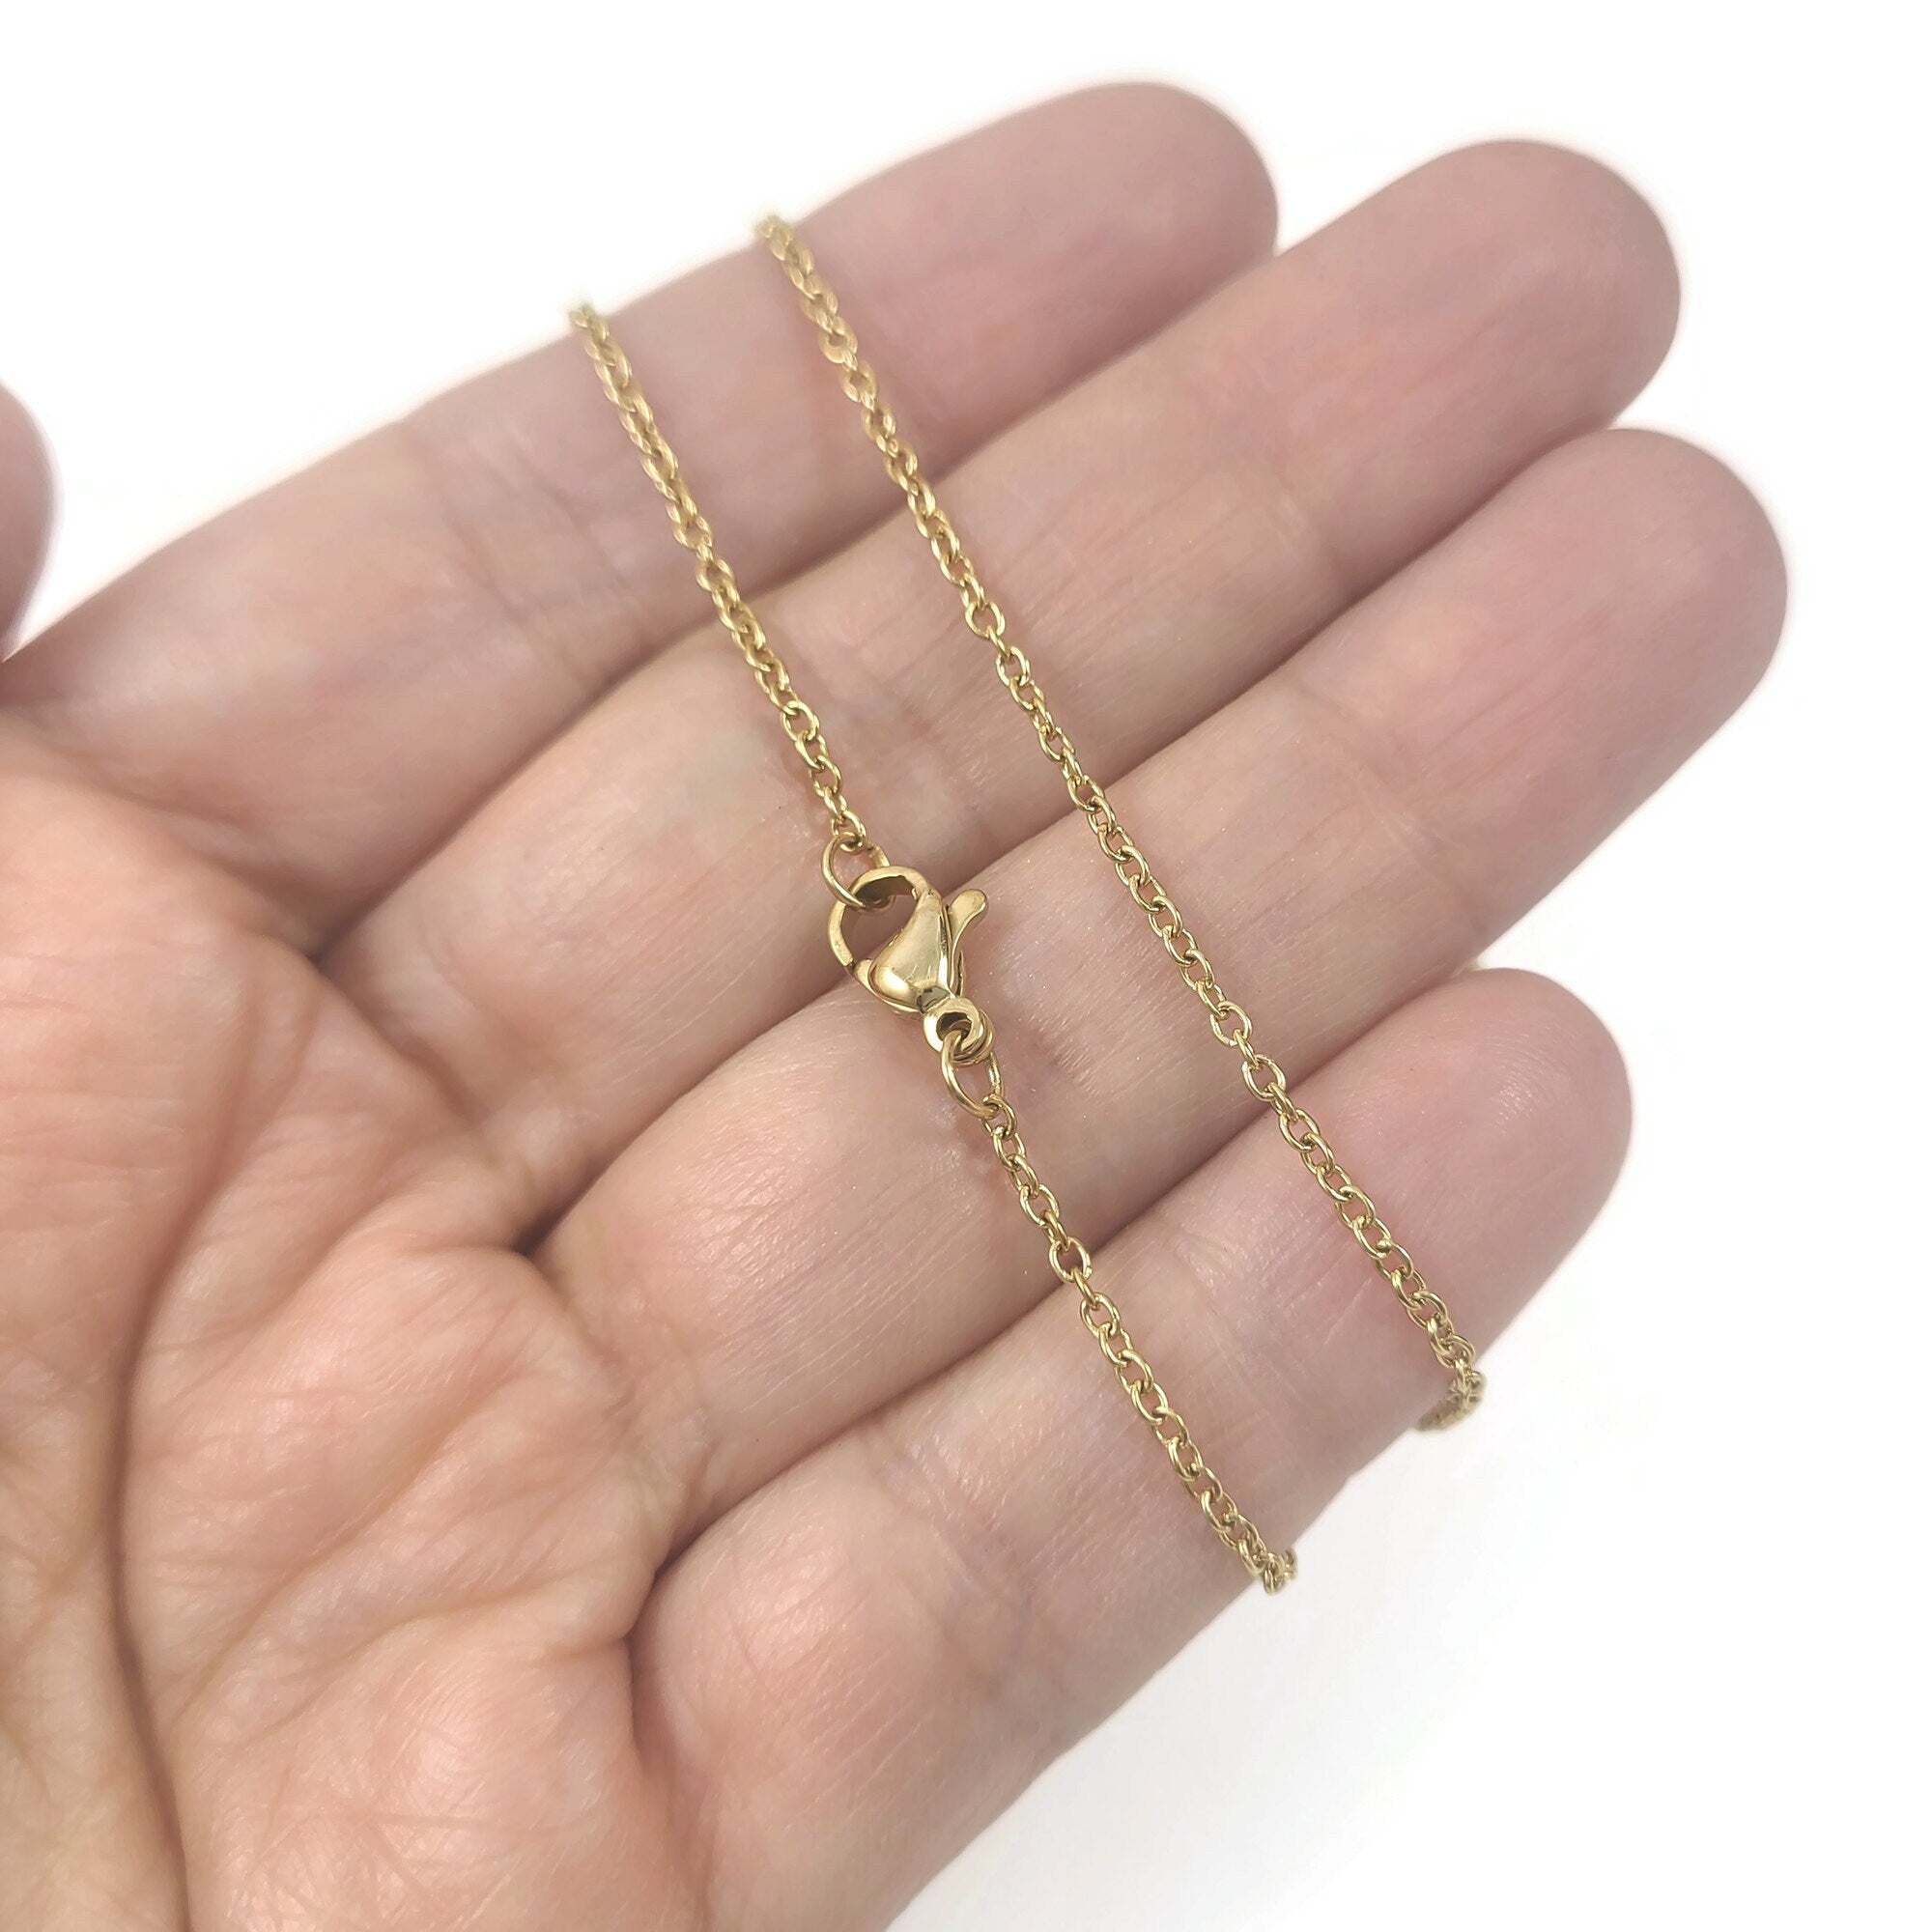 Ymiko 8 Pcs Necklace Extender Stainless Steel Gold Silver Necklace  Adjustment Extension Chain Jewelry Decoration,Gold Necklace Extender,Gold  Chain